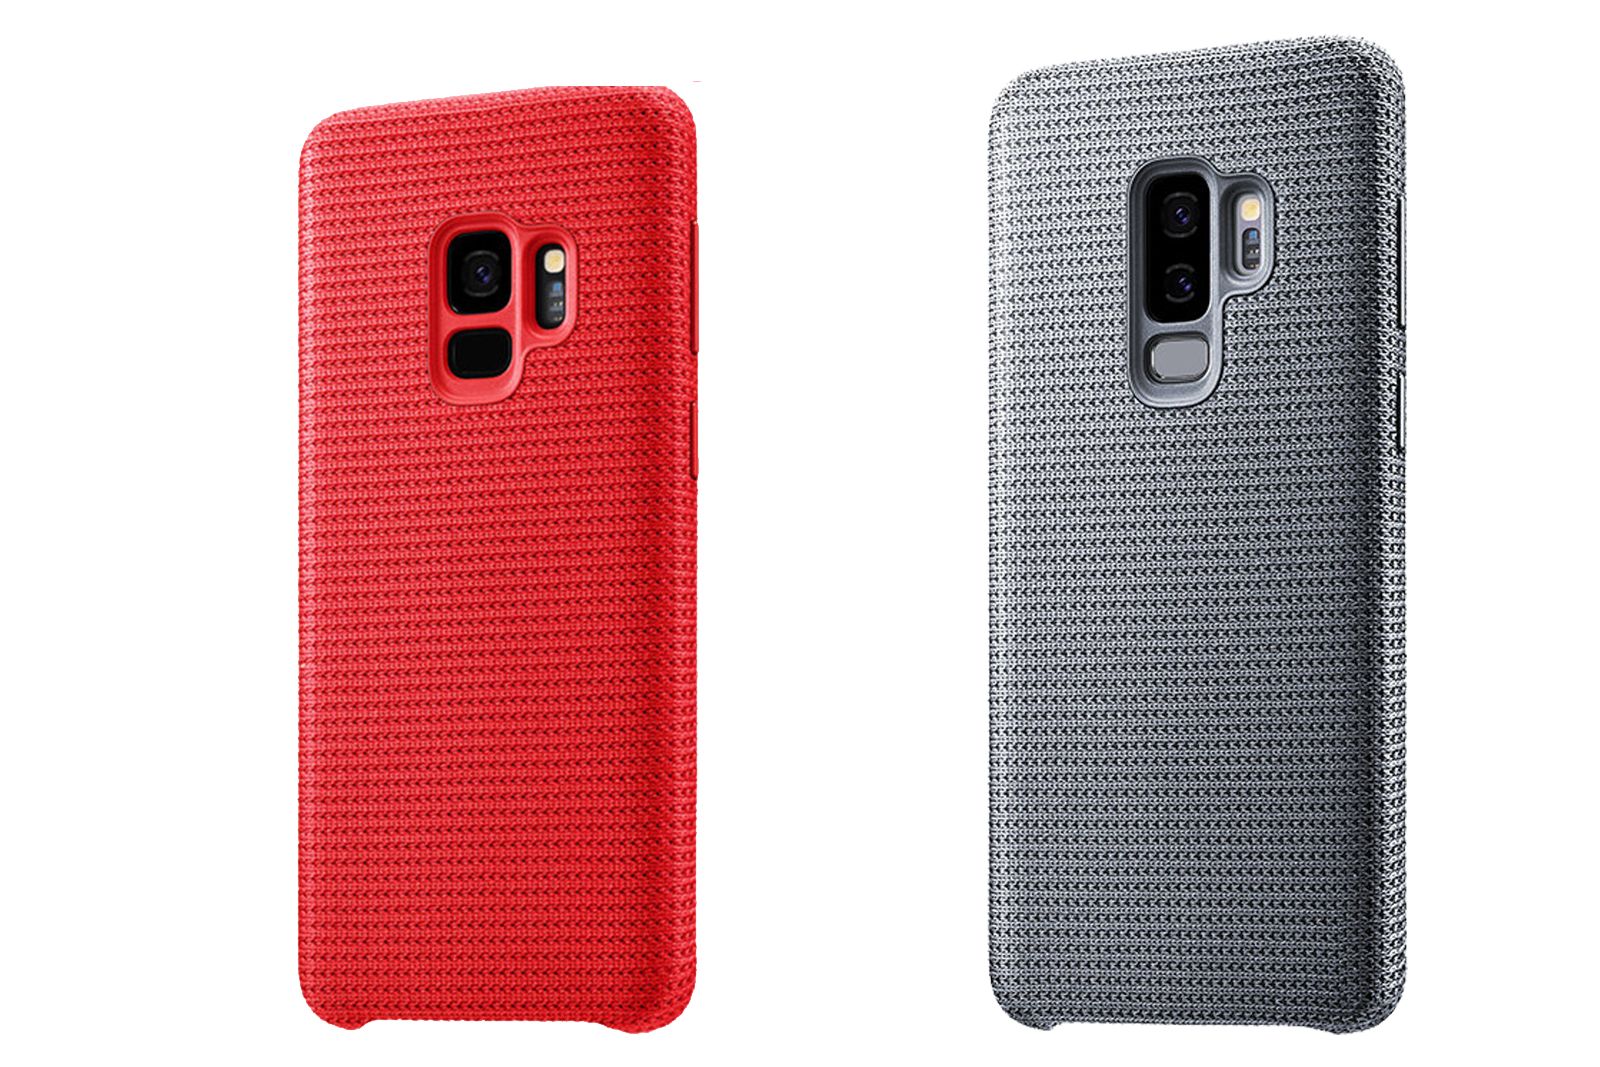 Best Samsung Galaxy S9 and S9 cases Protect your new Galaxy smartphone image 2